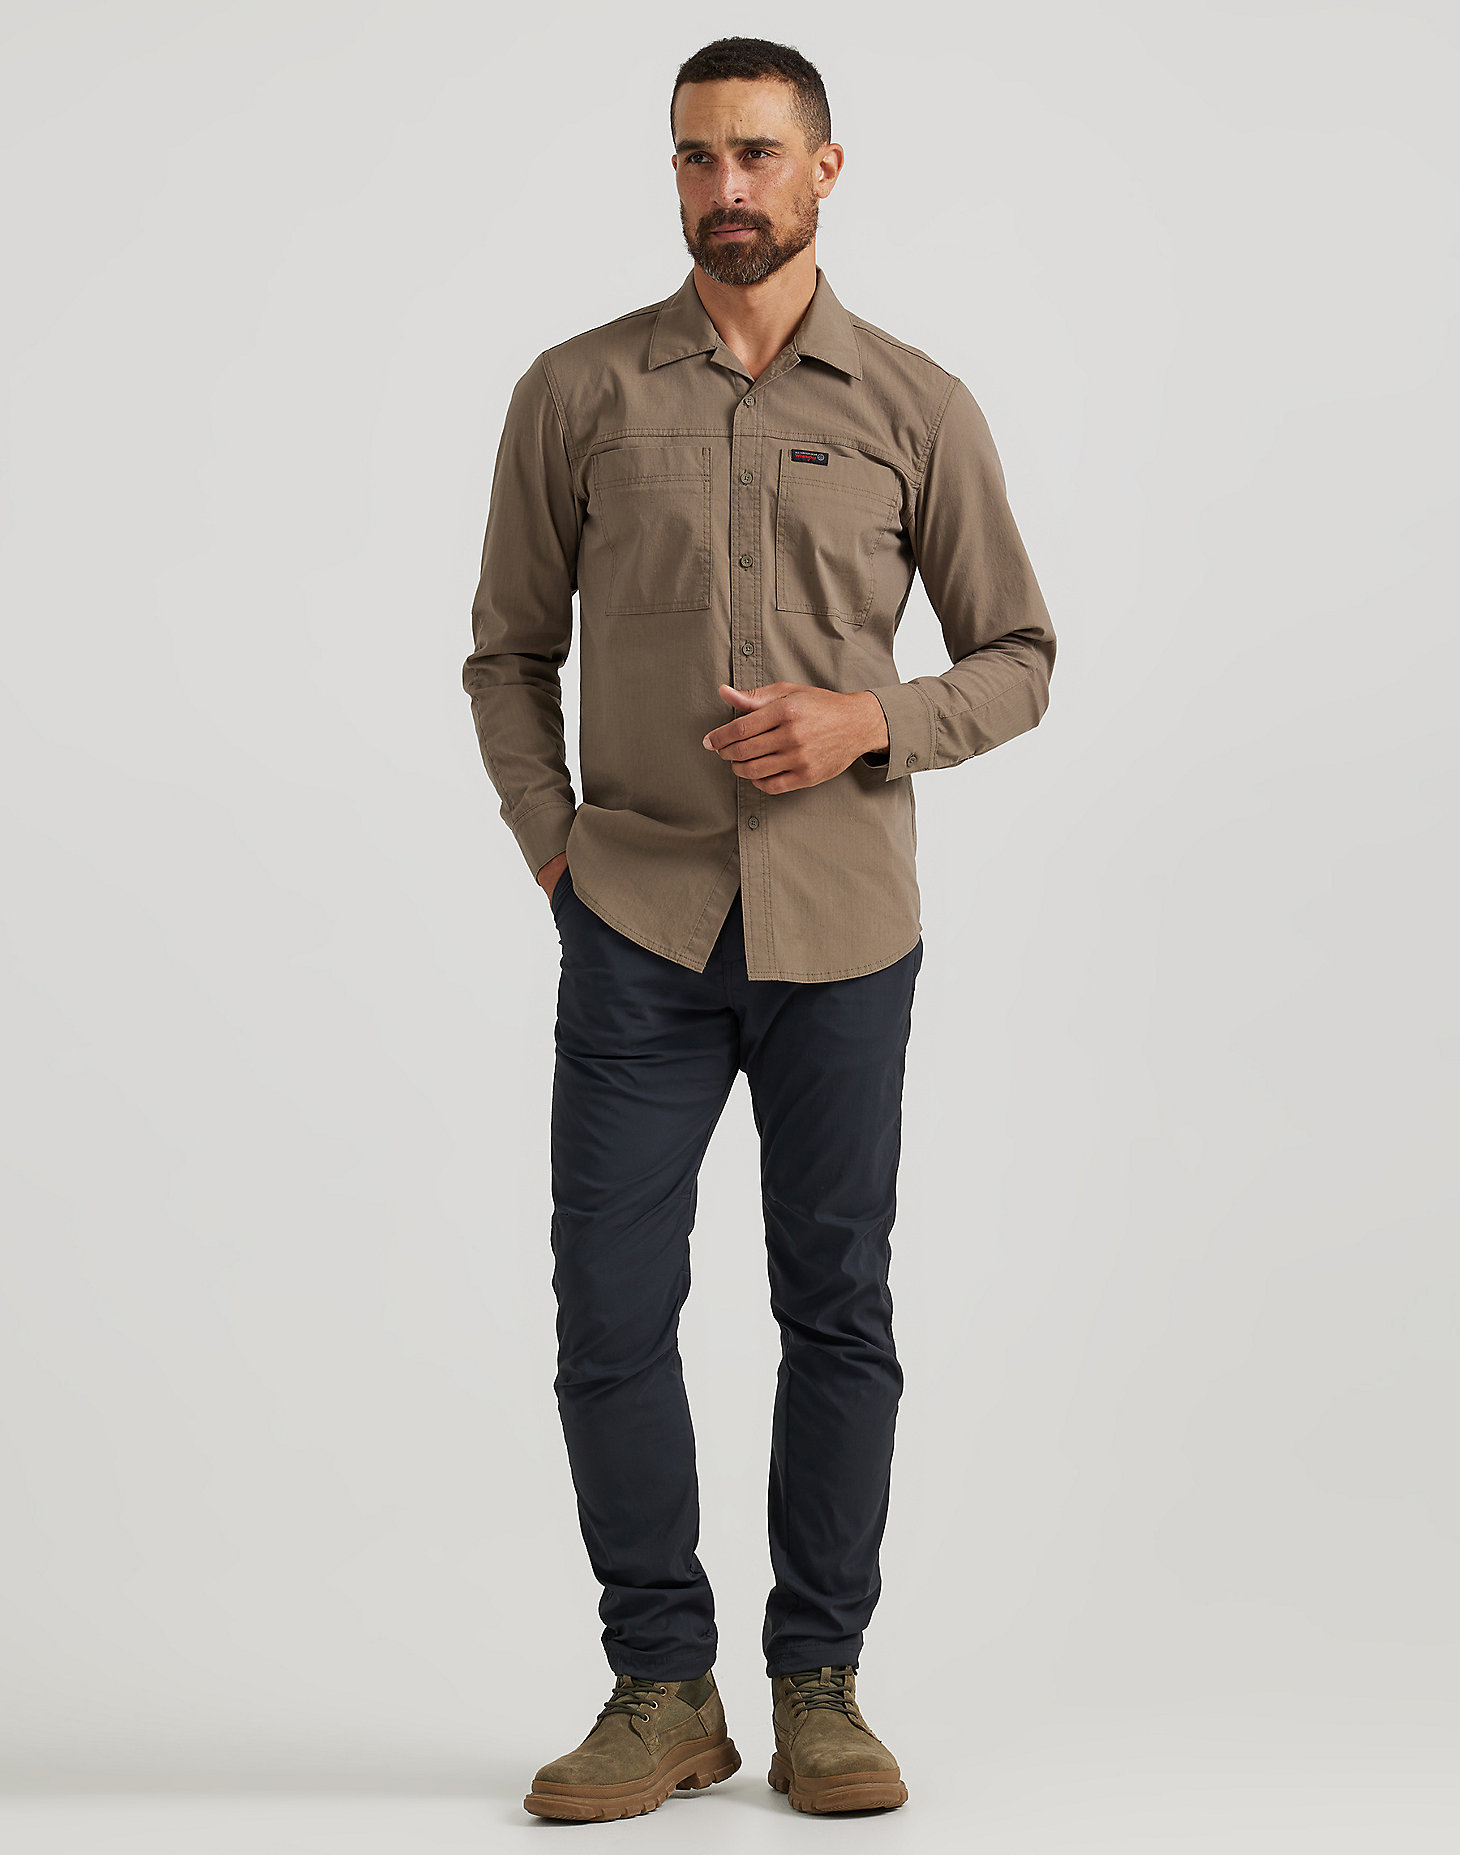 Long Sleeve Rugged Utility Shirt in Bungee Cord alternative view 3